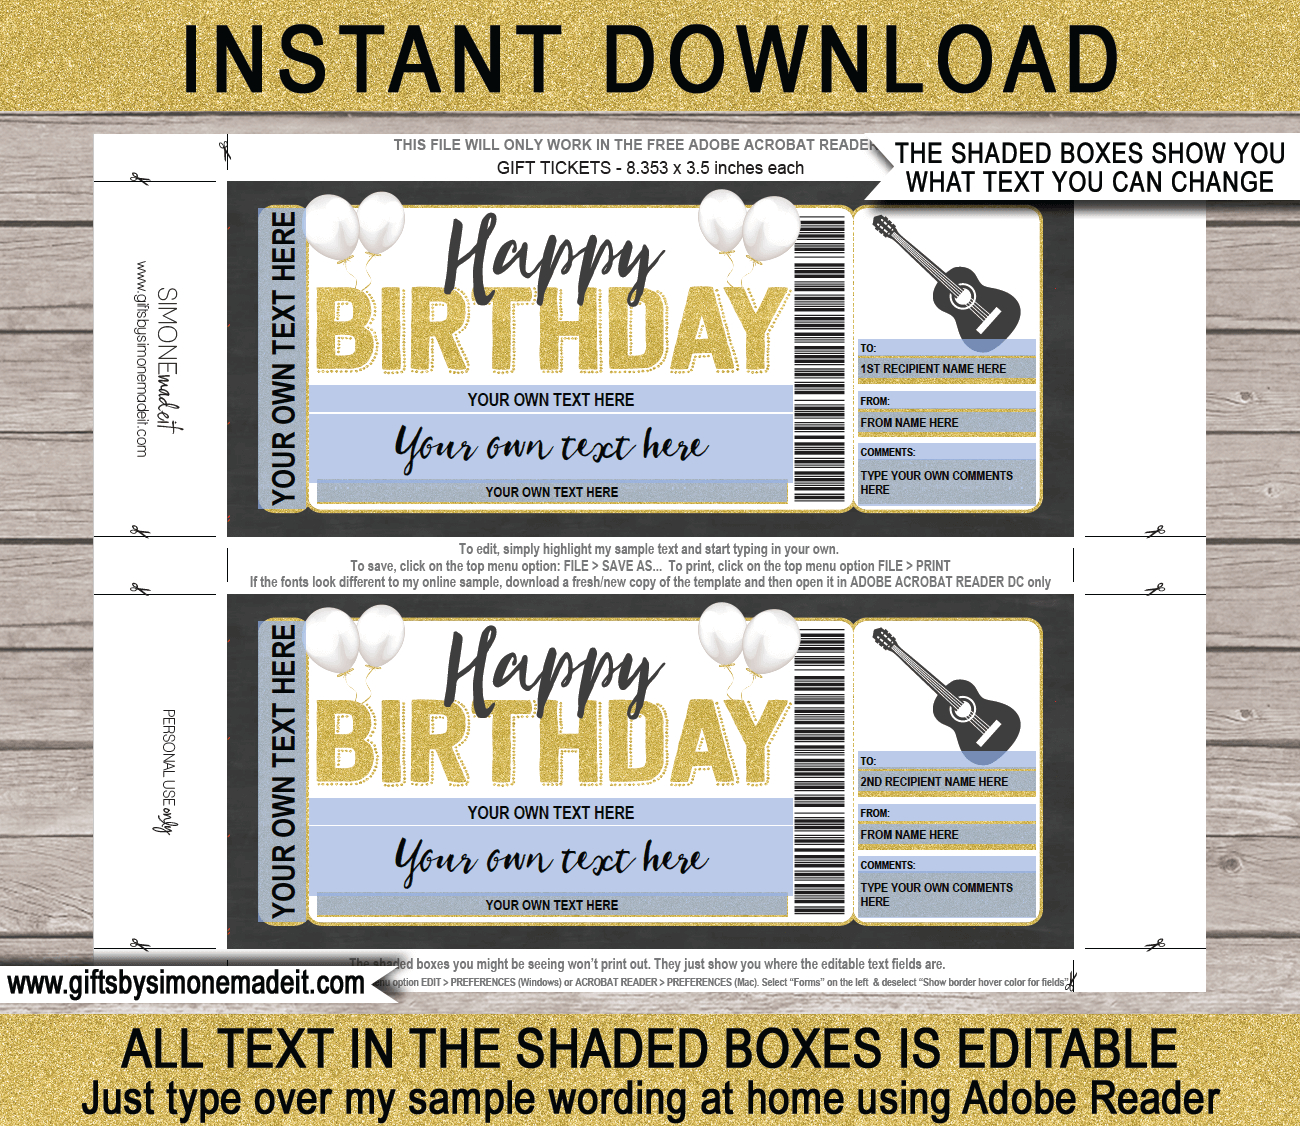 Birthday Guitar Lessons Gift Voucher Template - Free Printable Birthday Cards Guitar